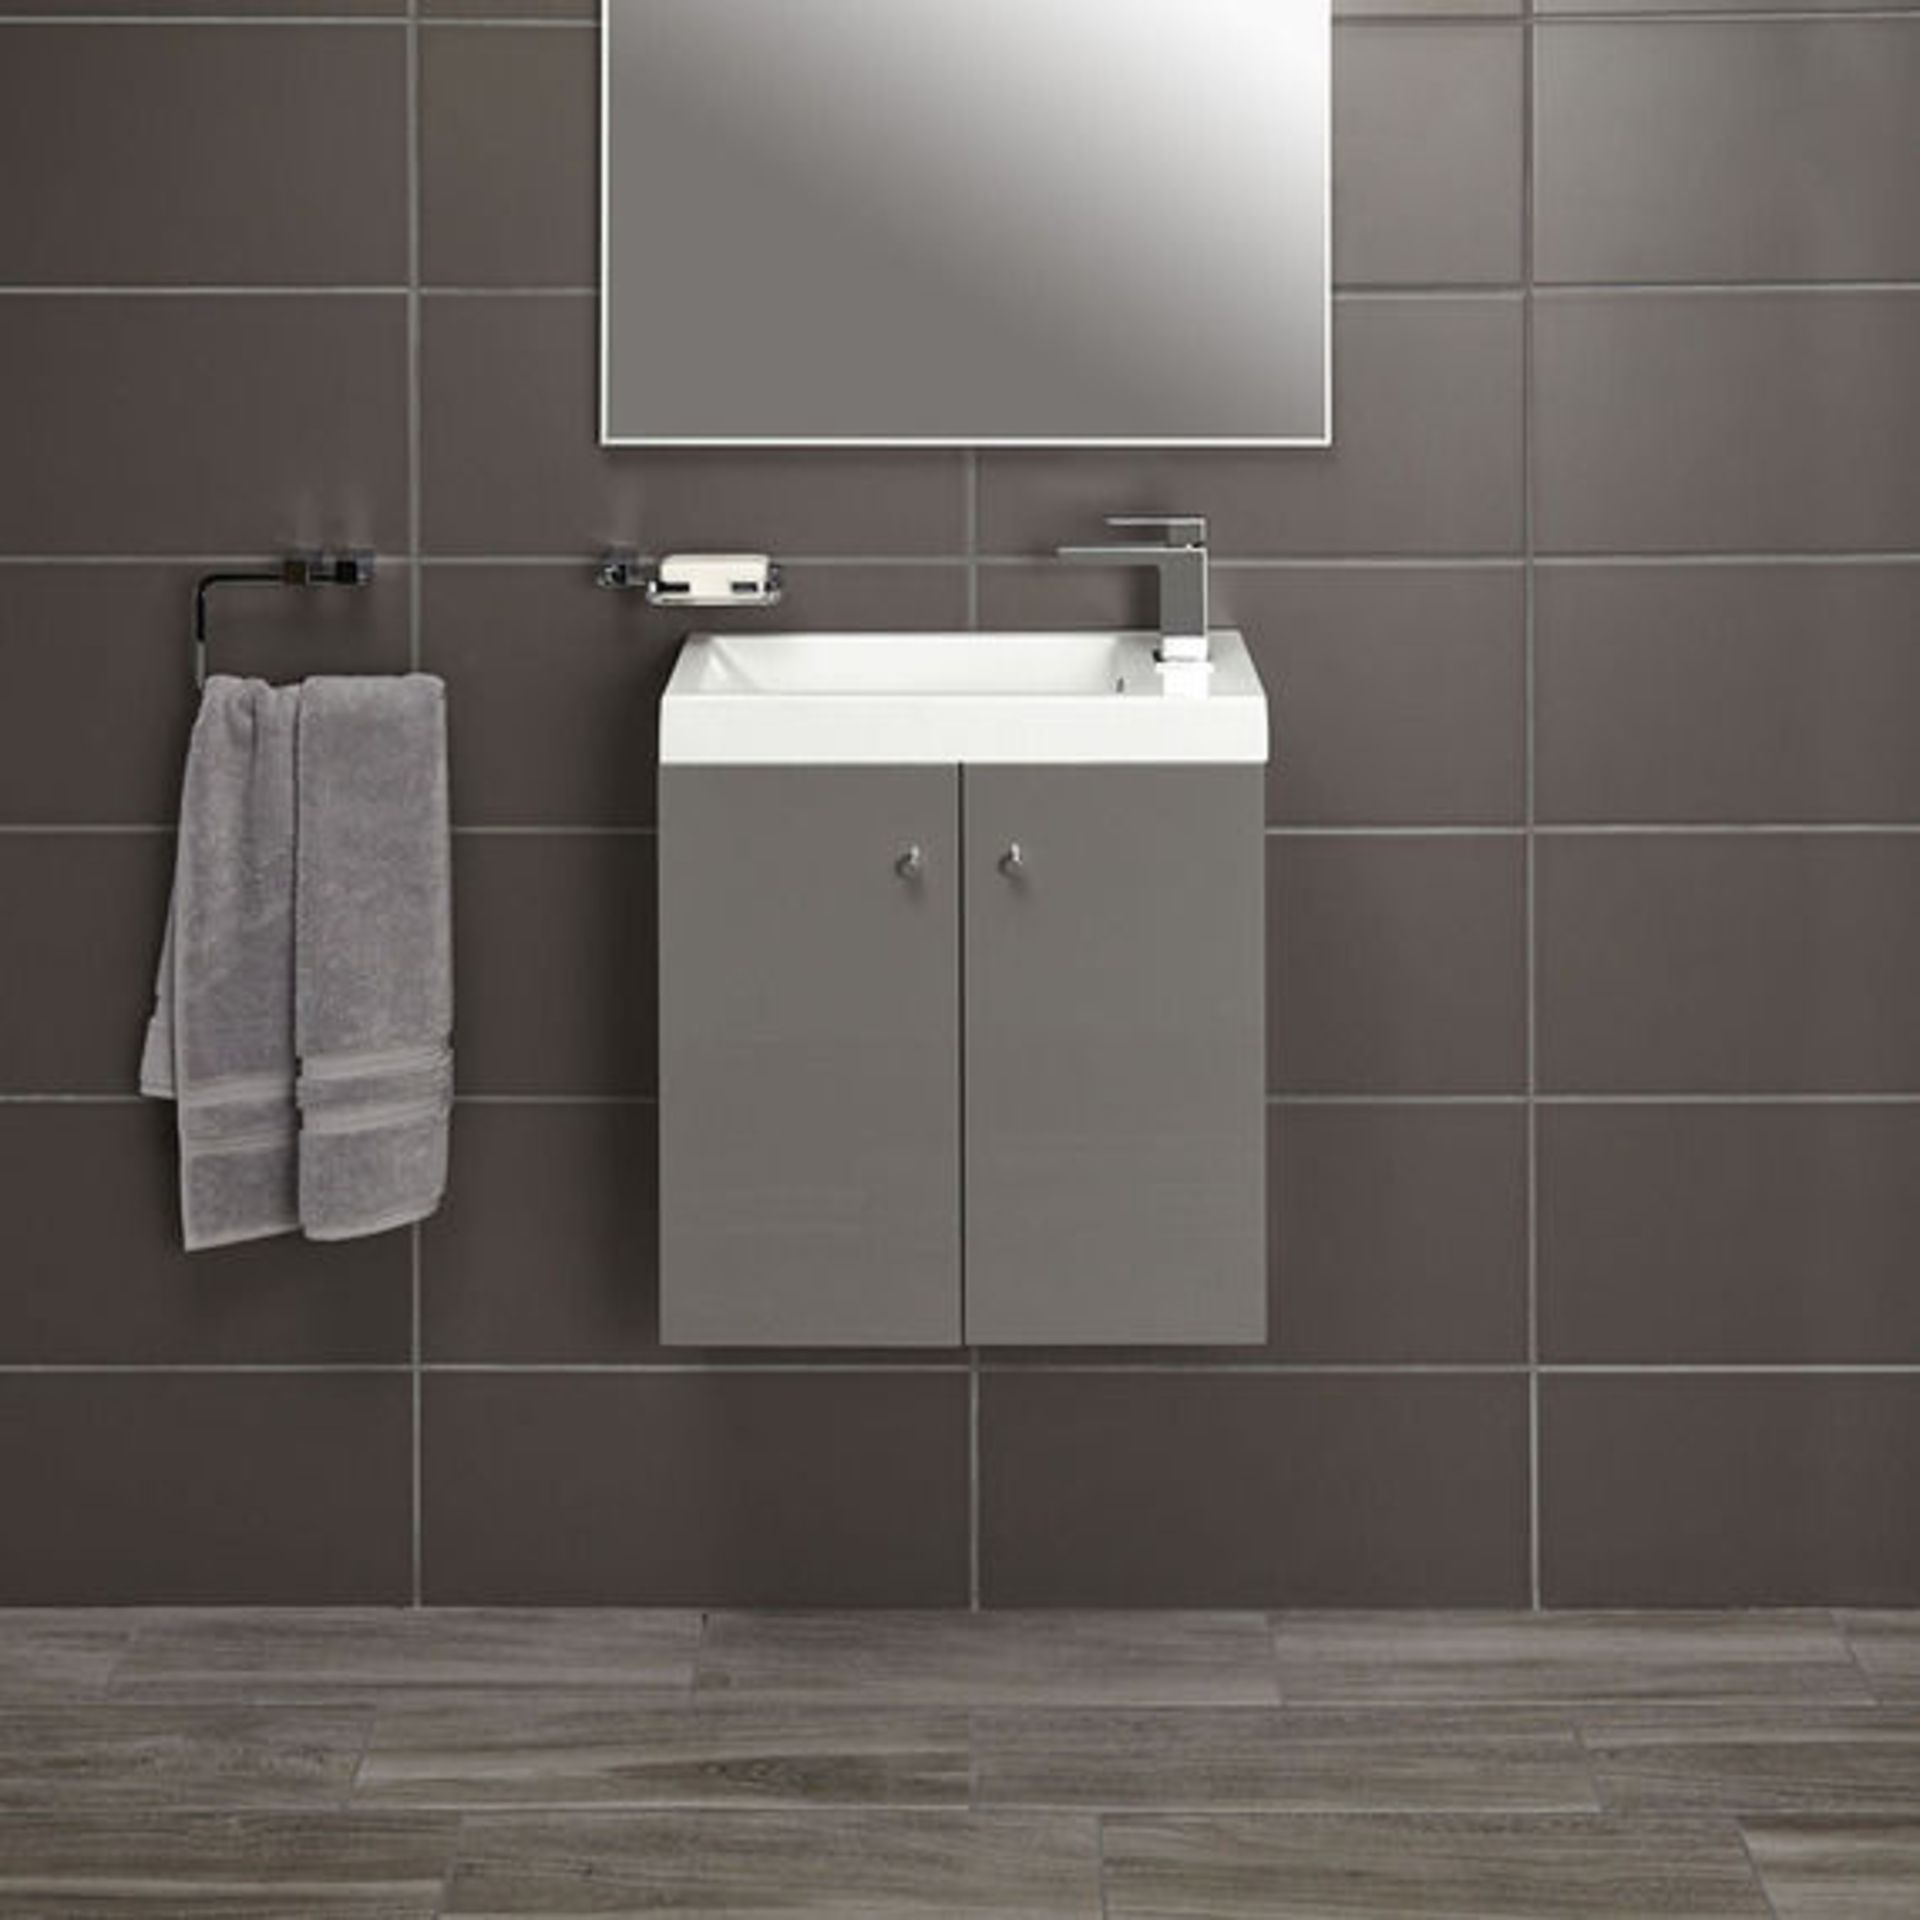 10 x Alpine Duo 495 Wall Mounted Vanity Units In Gloss Grey - Brand New Boxed Stock - Dimensions: - Image 3 of 5